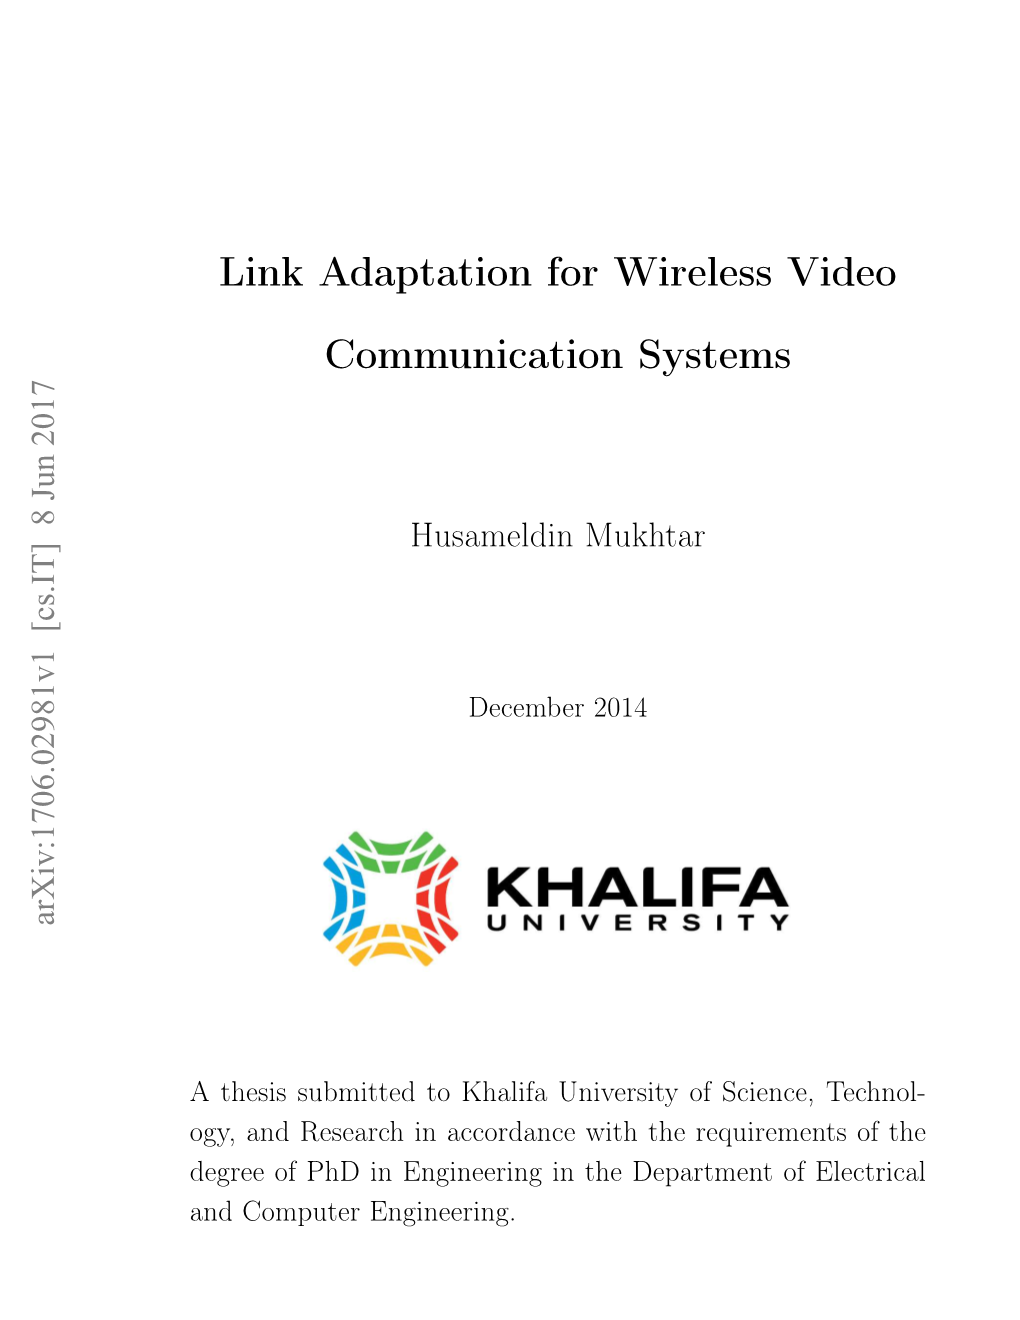 Link Adaptation for Wireless Video Communication Systems